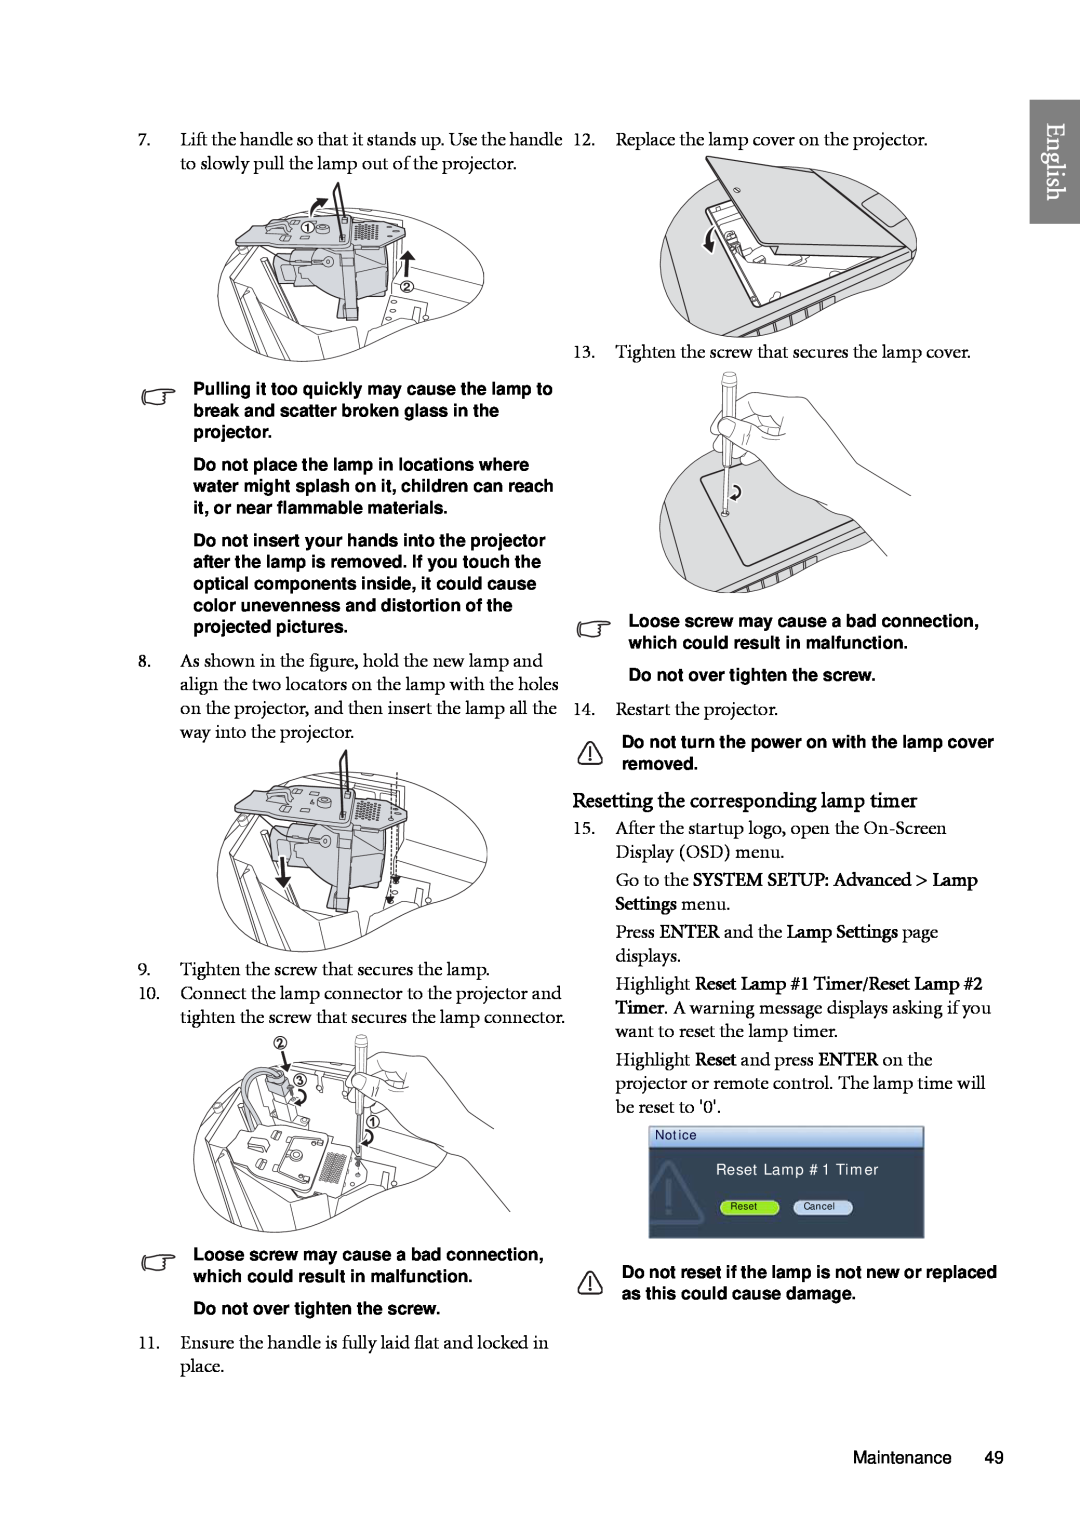 BenQ SP920 user manual English, Resetting the corresponding lamp timer, Restart the projector, way into the projector 